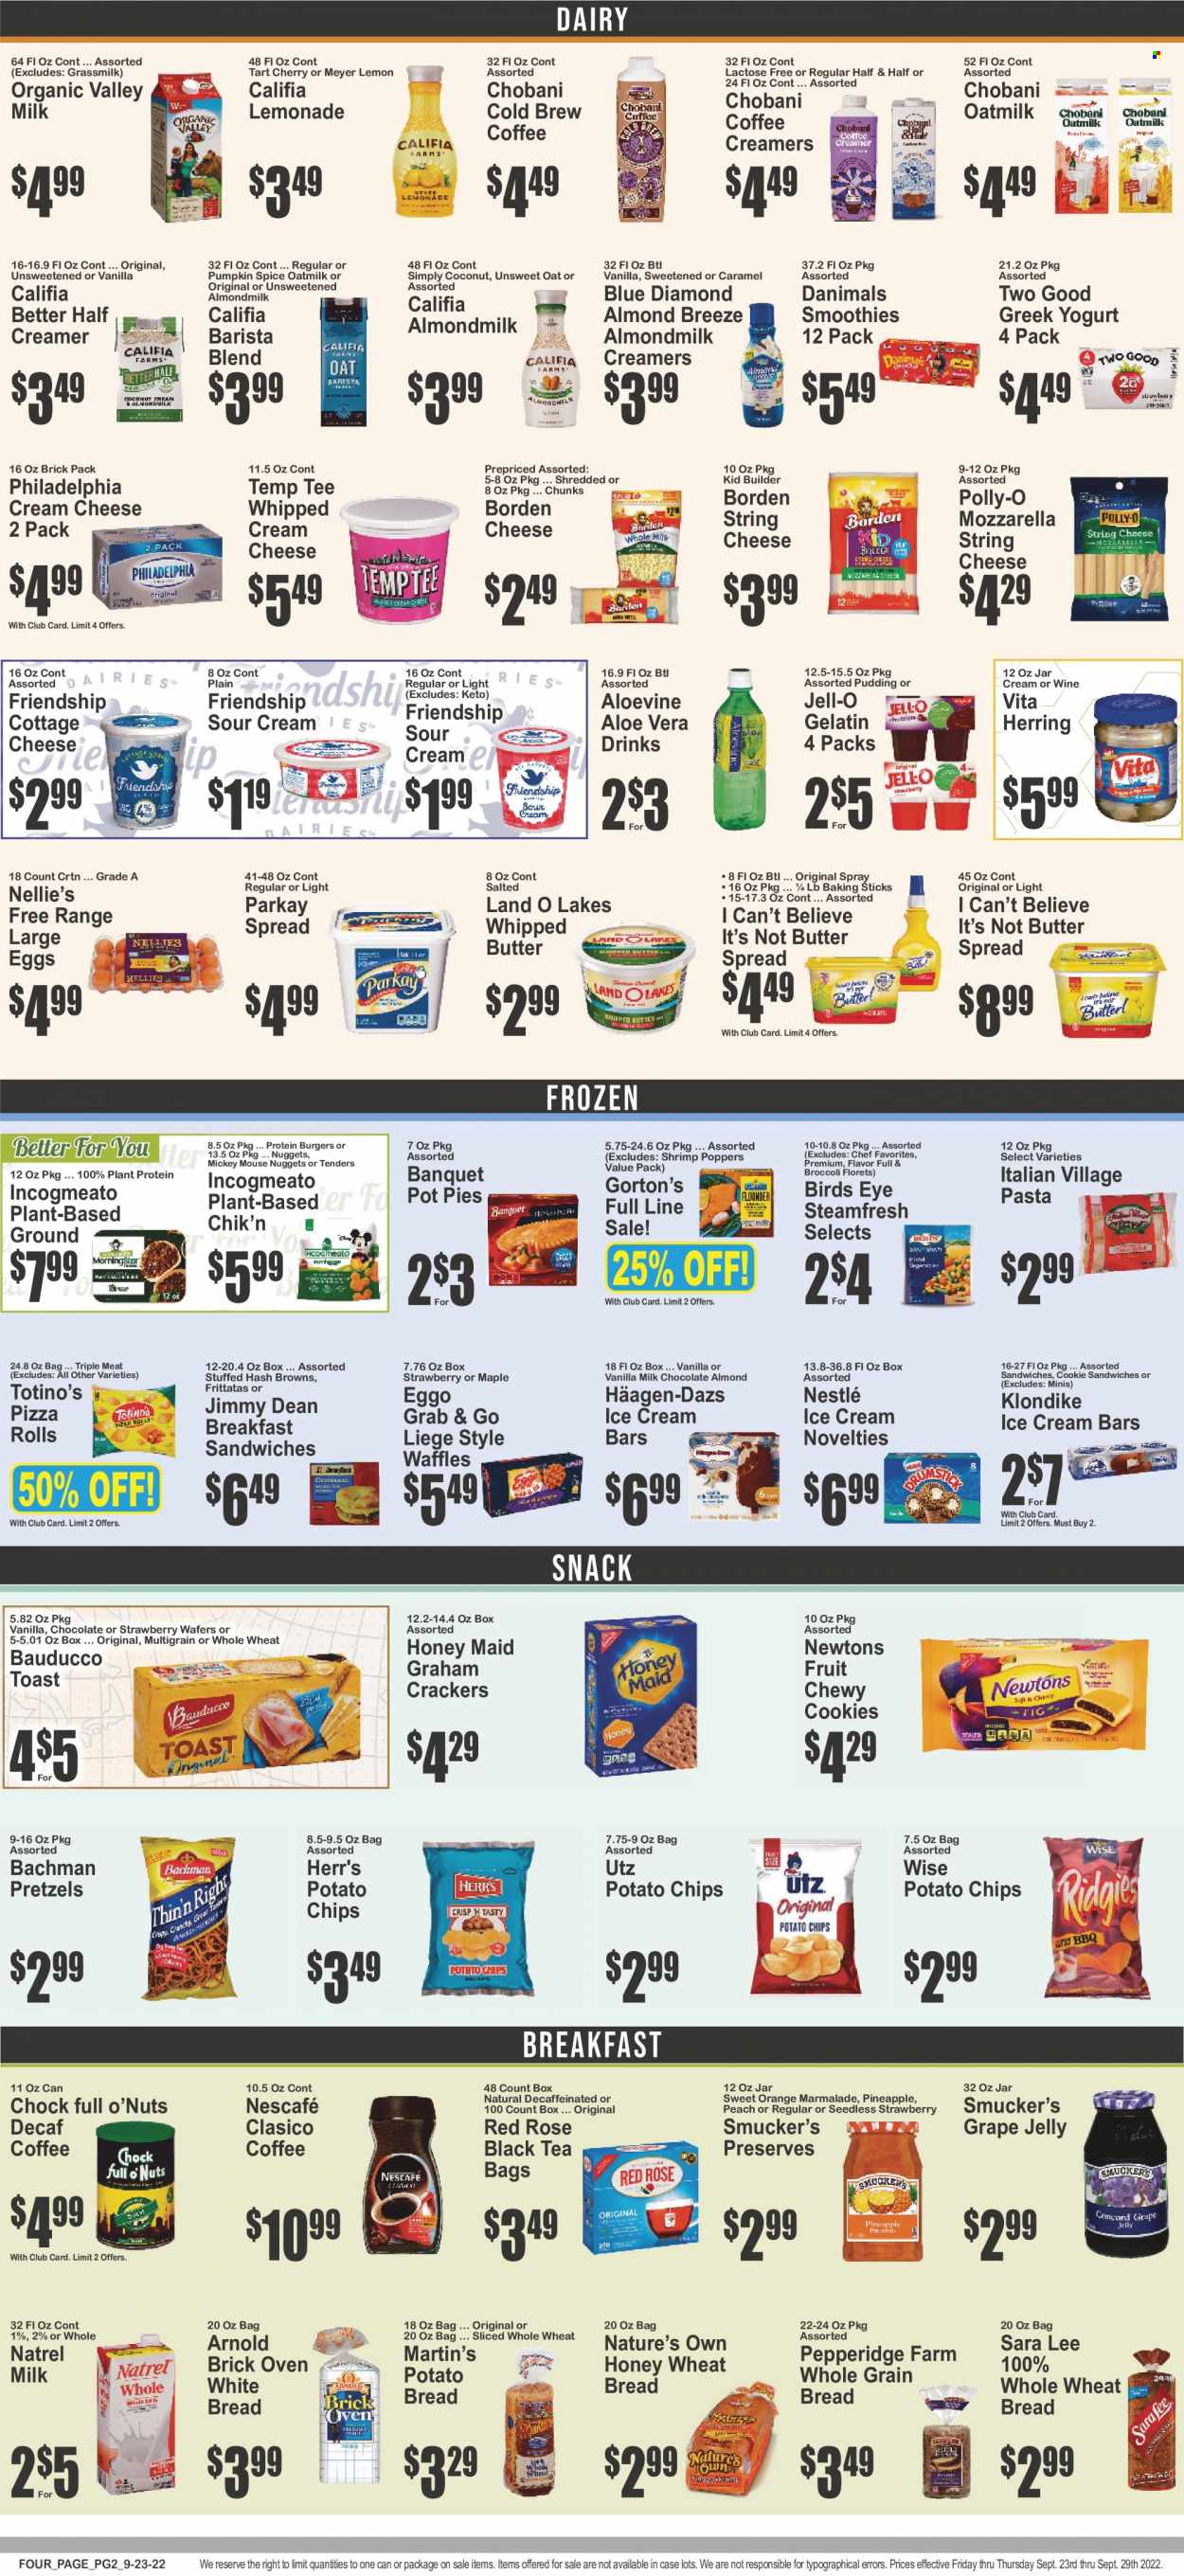 thumbnail - The Food Emporium Flyer - 09/23/2022 - 09/29/2022 - Sales products - wheat bread, white bread, pretzels, pizza rolls, Sara Lee, waffles, broccoli, pineapple, cherries, oranges, coconut, herring, shrimps, Gorton's, pizza, nuggets, hamburger, pasta, Bird's Eye, Jimmy Dean, cottage cheese, string cheese, Philadelphia, greek yoghurt, pudding, yoghurt, Chobani, Danimals, almond milk, Almond Breeze, oat milk, large eggs, whipped butter, I Can't Believe It's Not Butter, sour cream, whipped cream, creamer, ice cream, ice cream bars, Mickey Mouse, Häagen-Dazs, hash browns, cookies, graham crackers, Nestlé, wafers, snack, jelly, crackers, potato chips, Jell-O, plant protein, Honey Maid, spice, grape jelly, Blue Diamond, lemonade, smoothie, tea bags, coffee, Nescafé, wine, rosé wine, Half and half. Page 2.